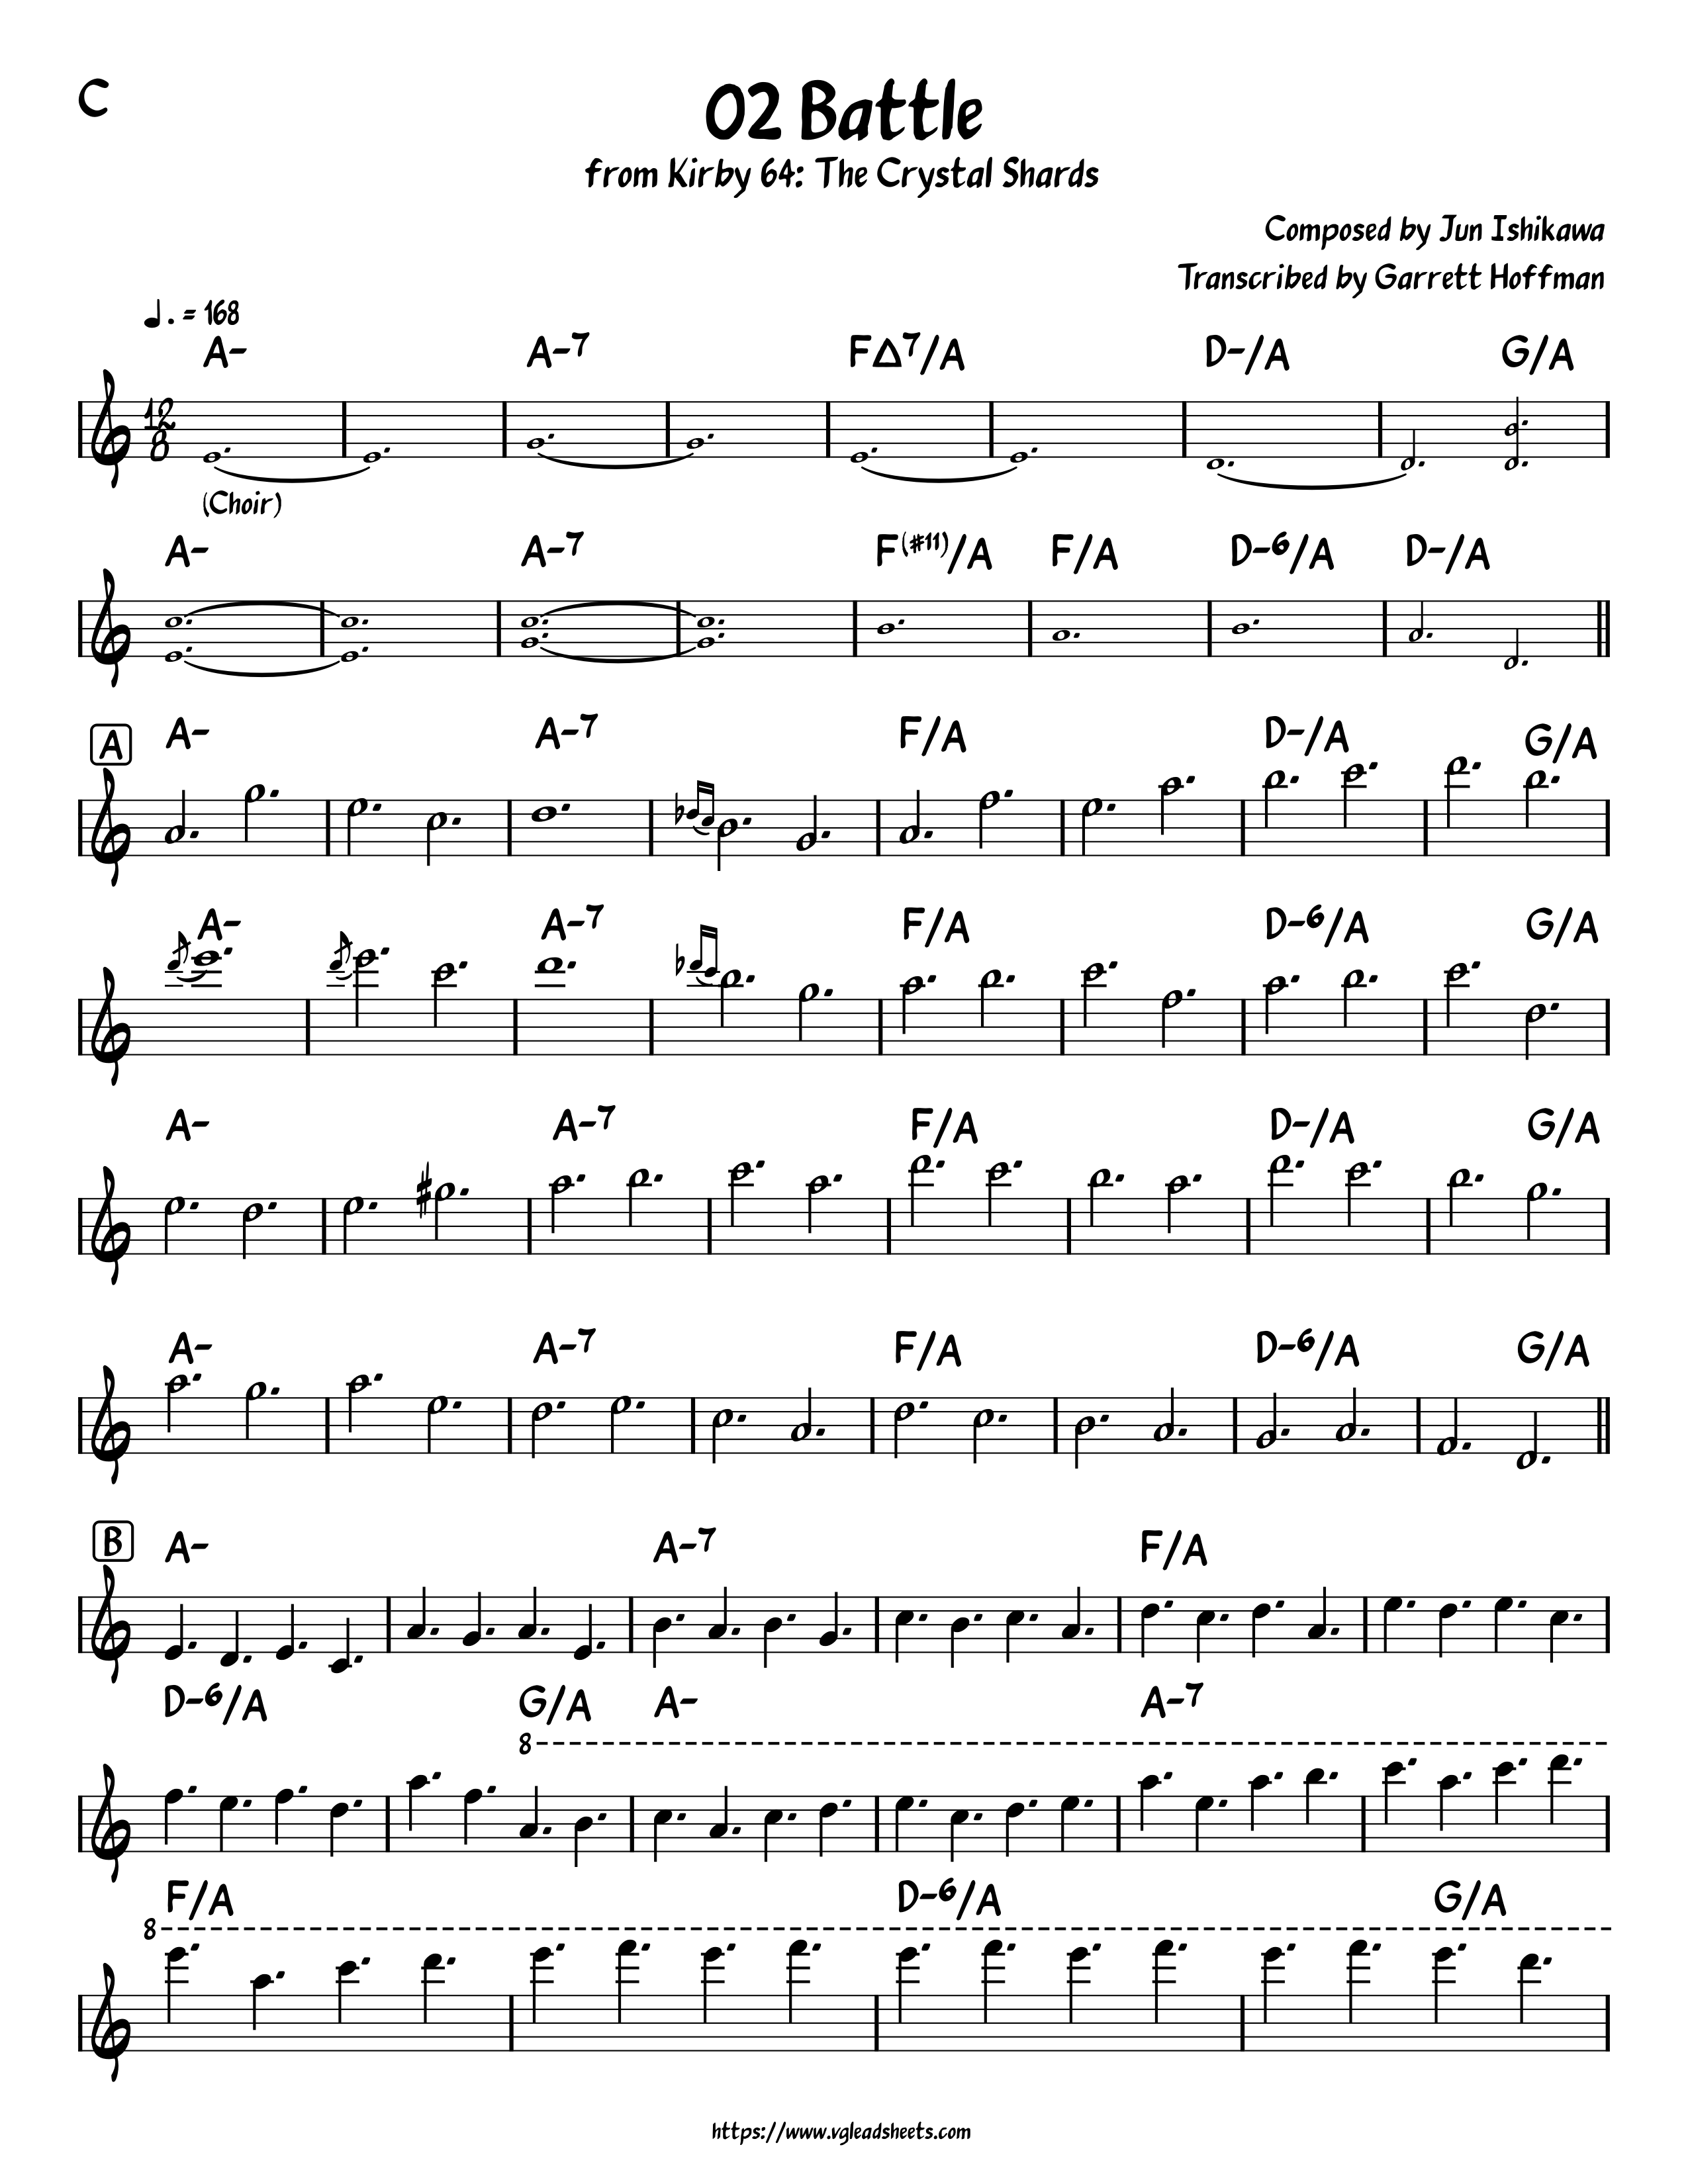 Kirby 64: The Crystal Shards - 02 Battle  - Lead Sheets  for Video Game Music